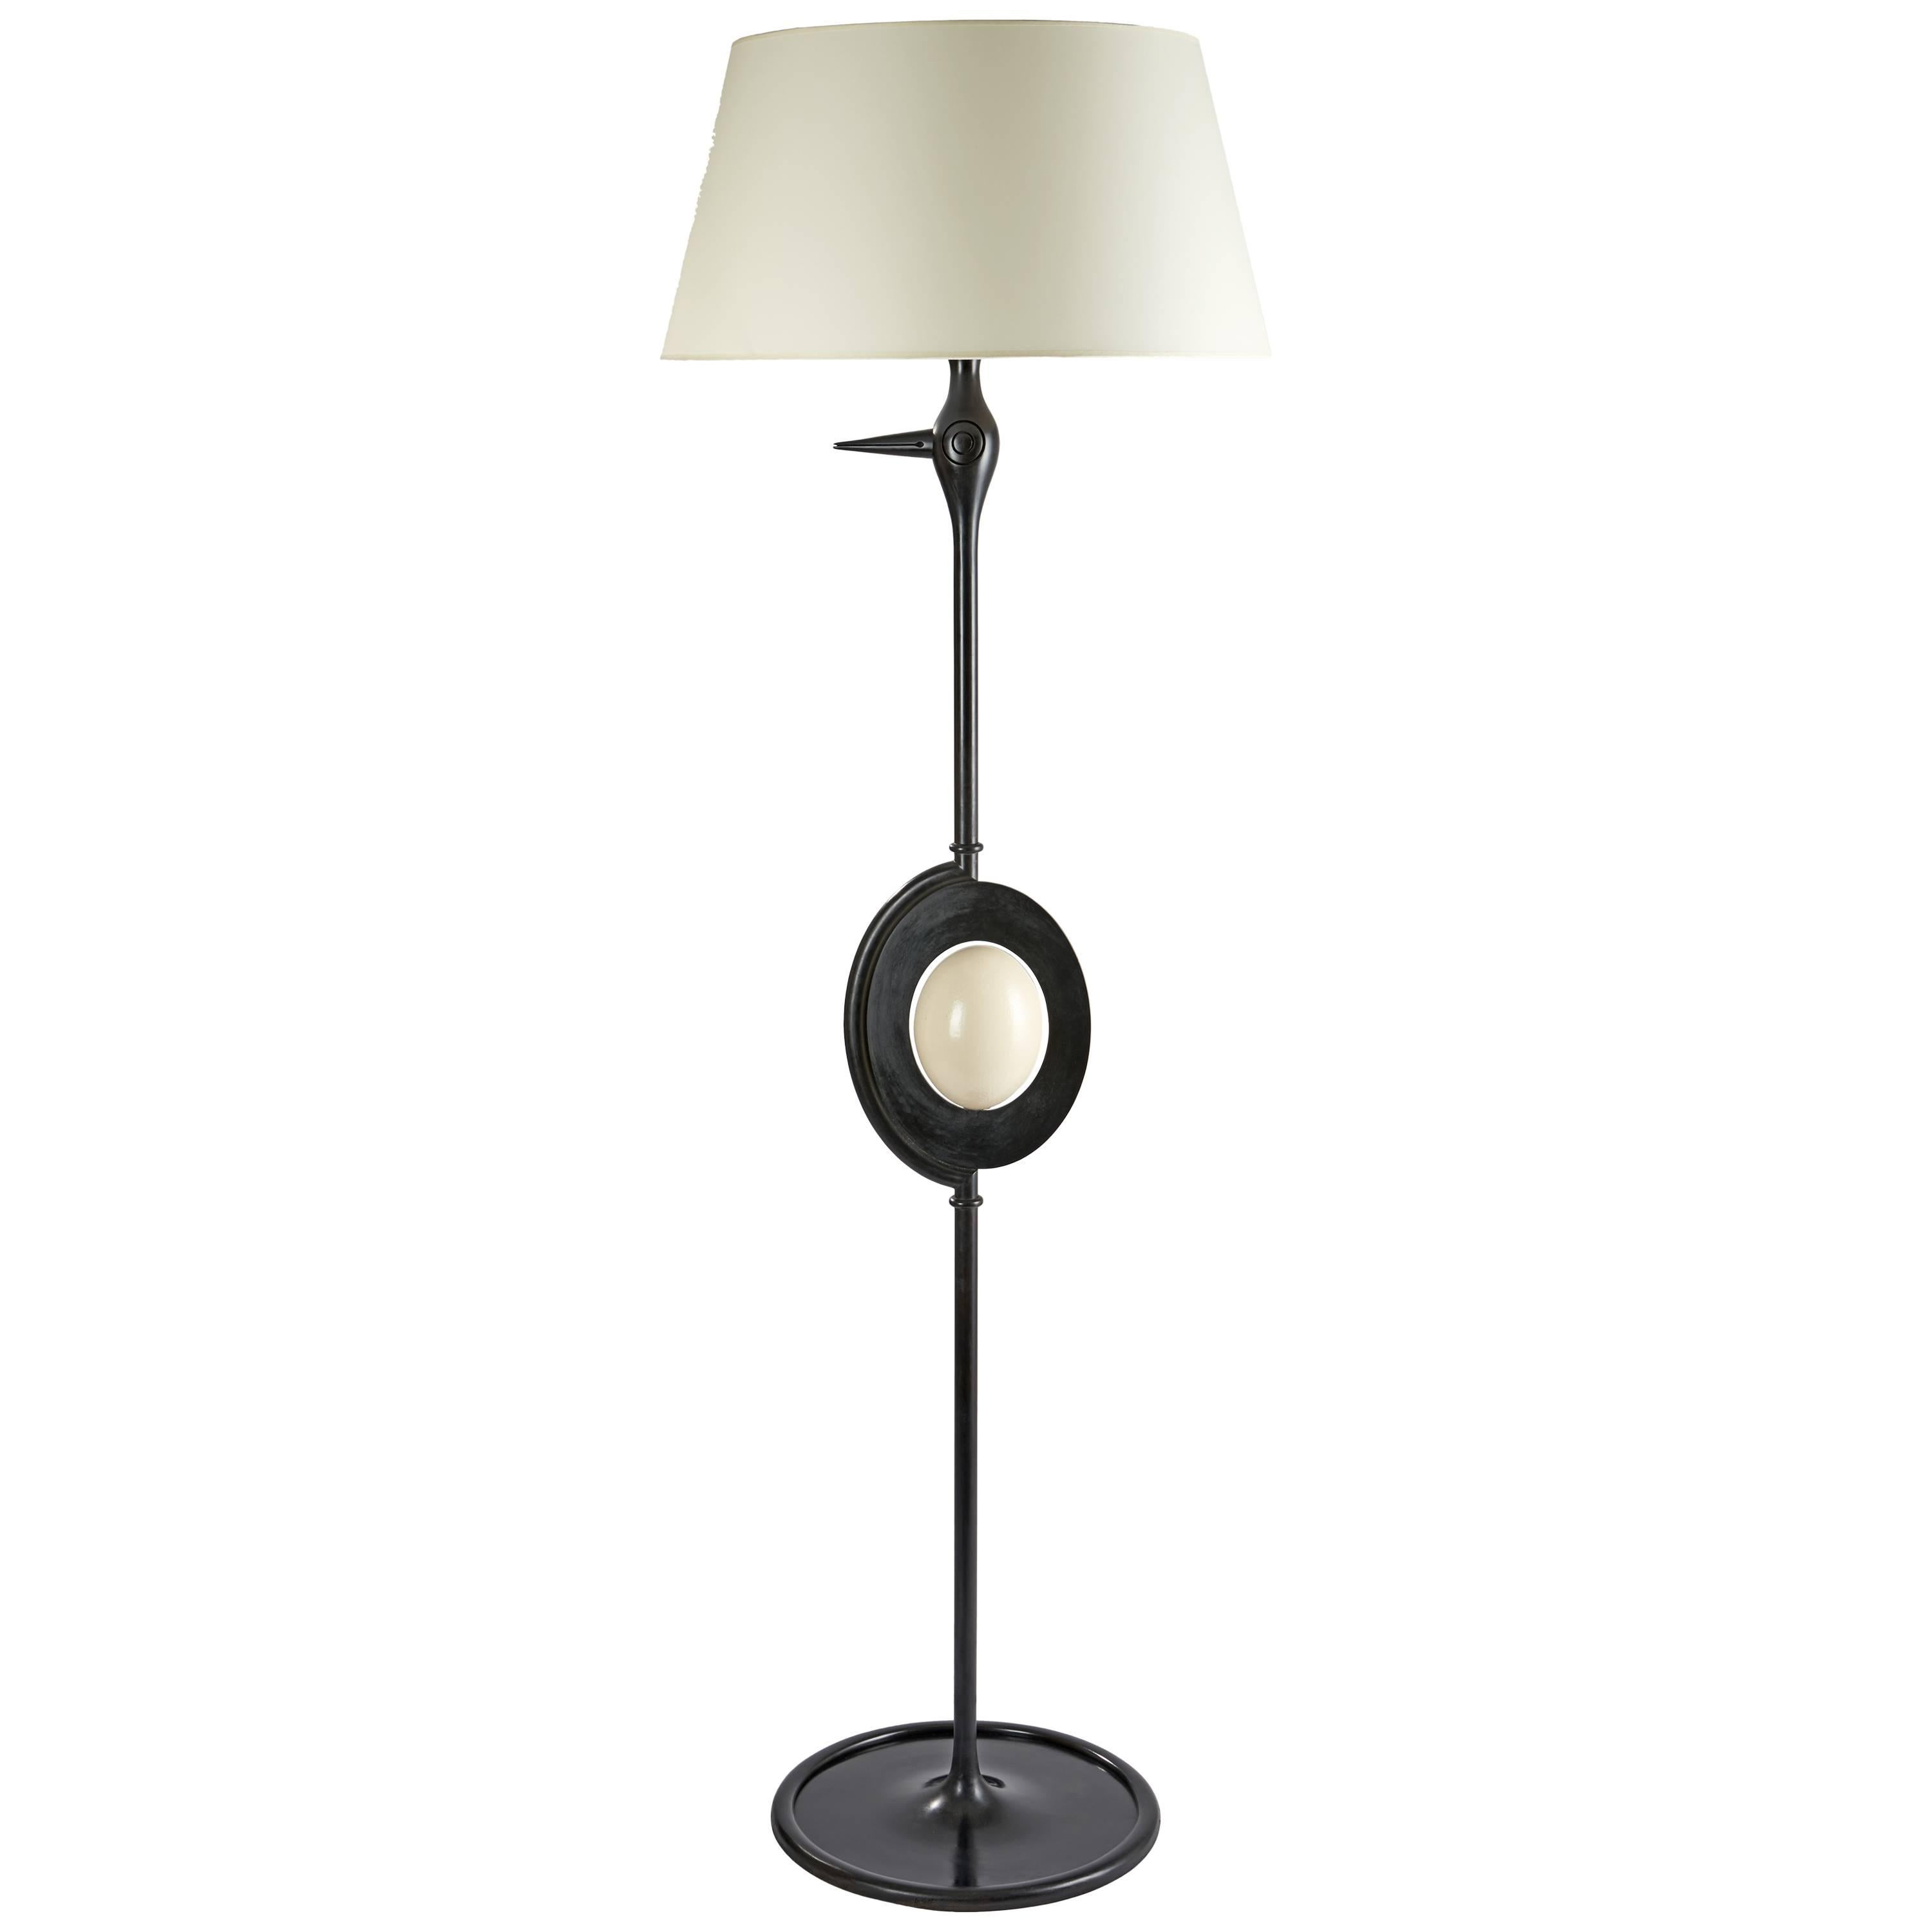 Autruche Lamp by Le Gall Hubert